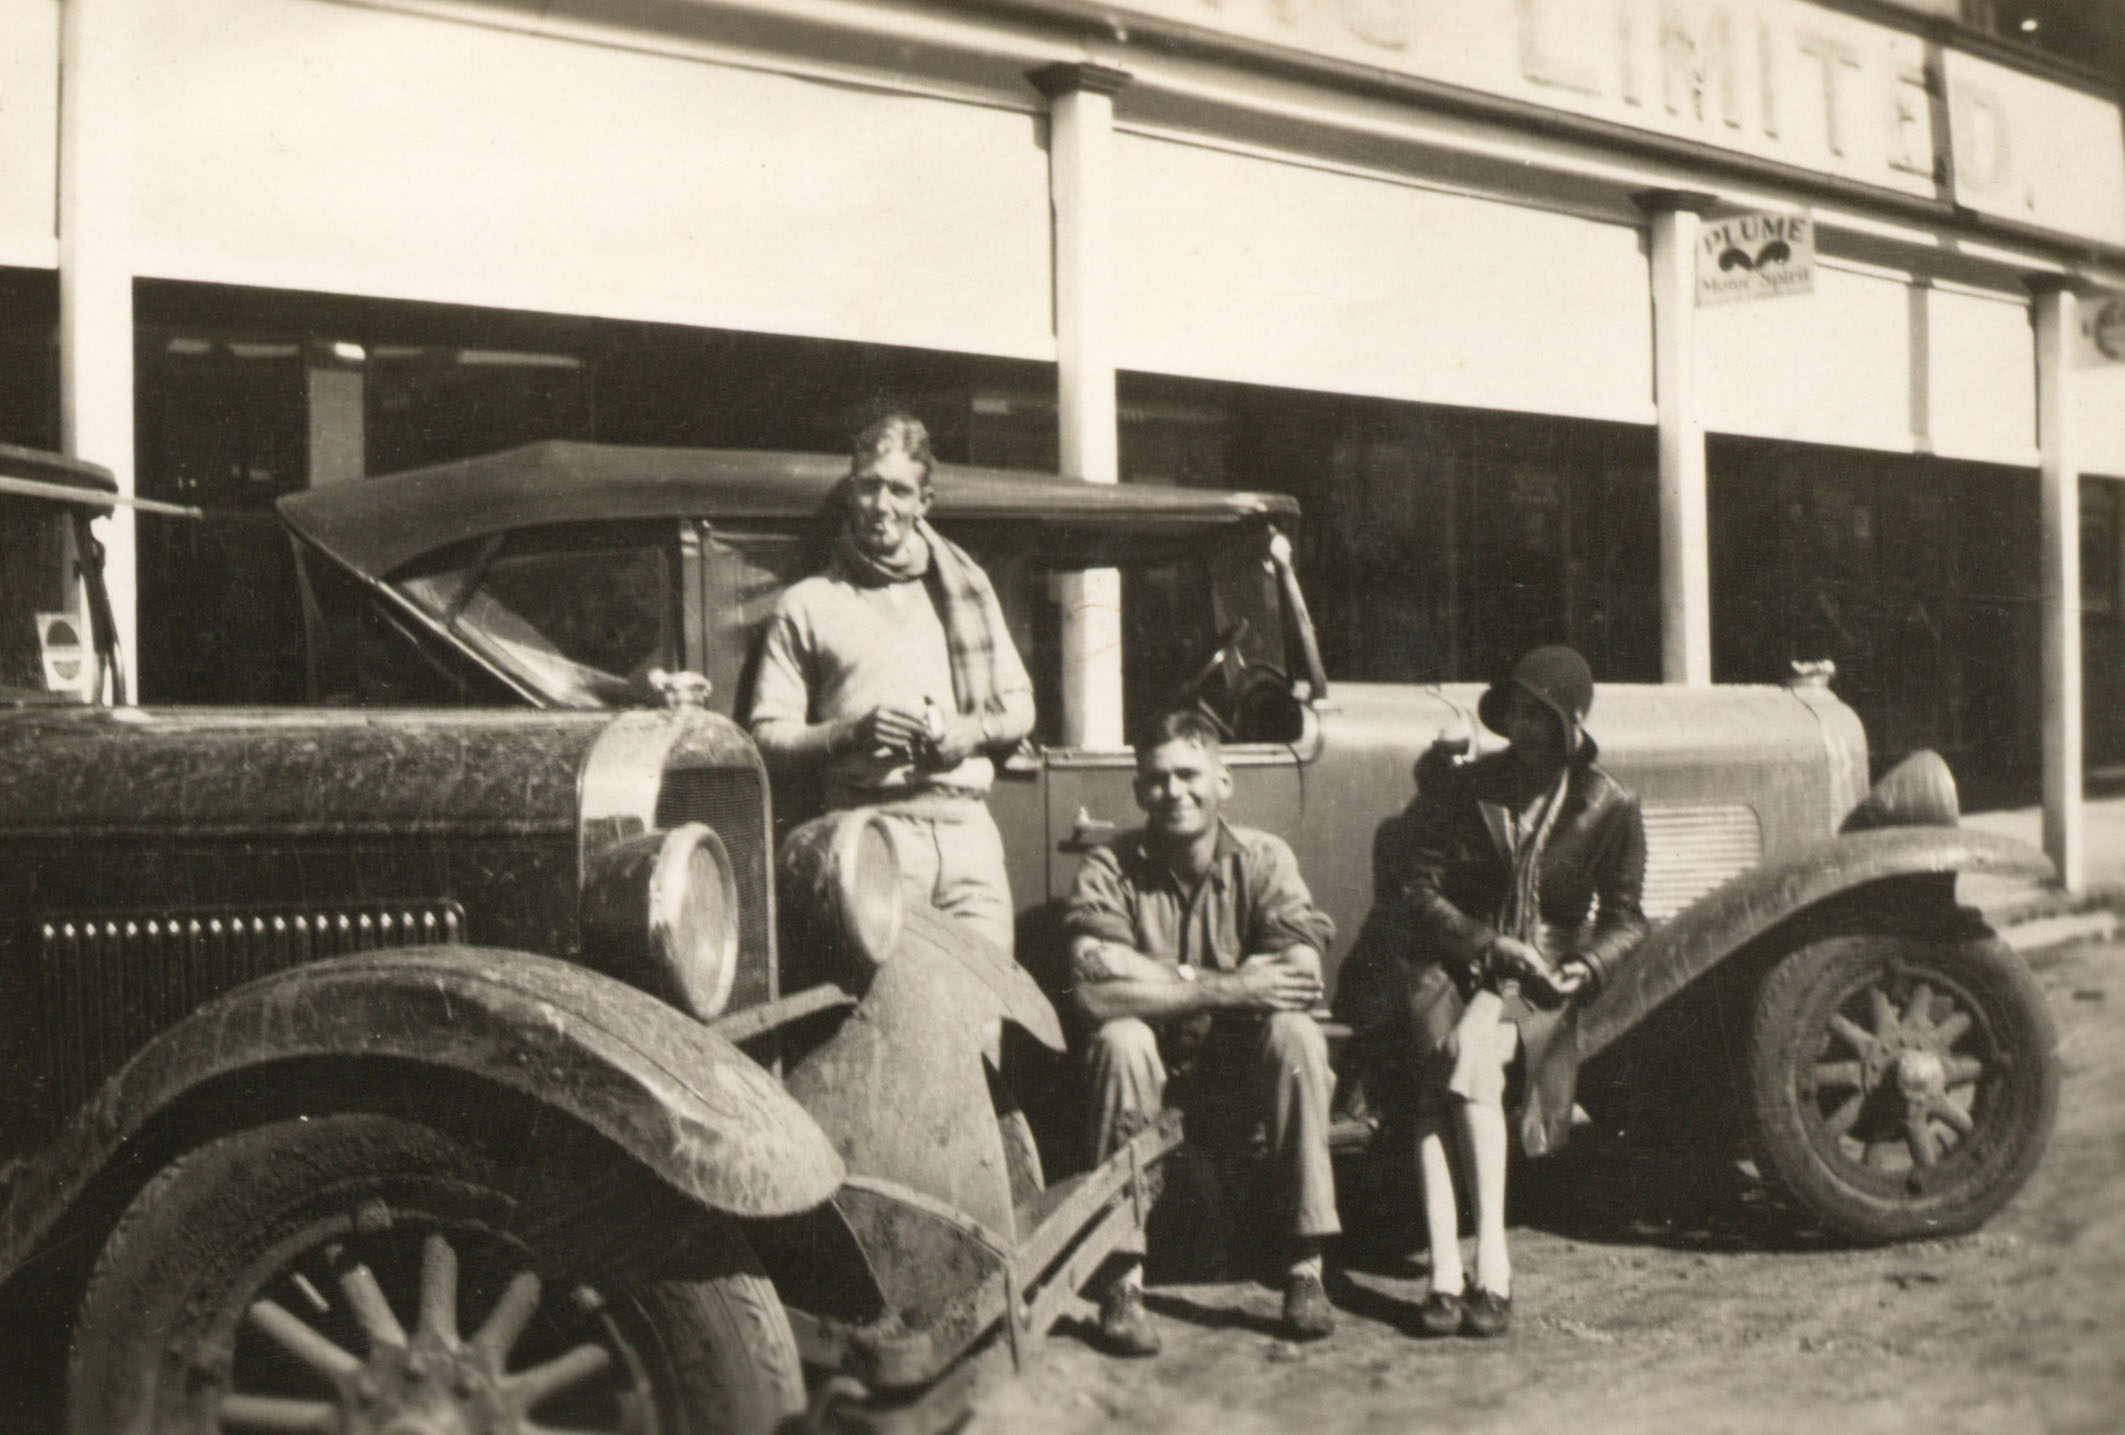 Corona Station employees take the car for a visit to town, Queensland, 1930 (68-93-08)